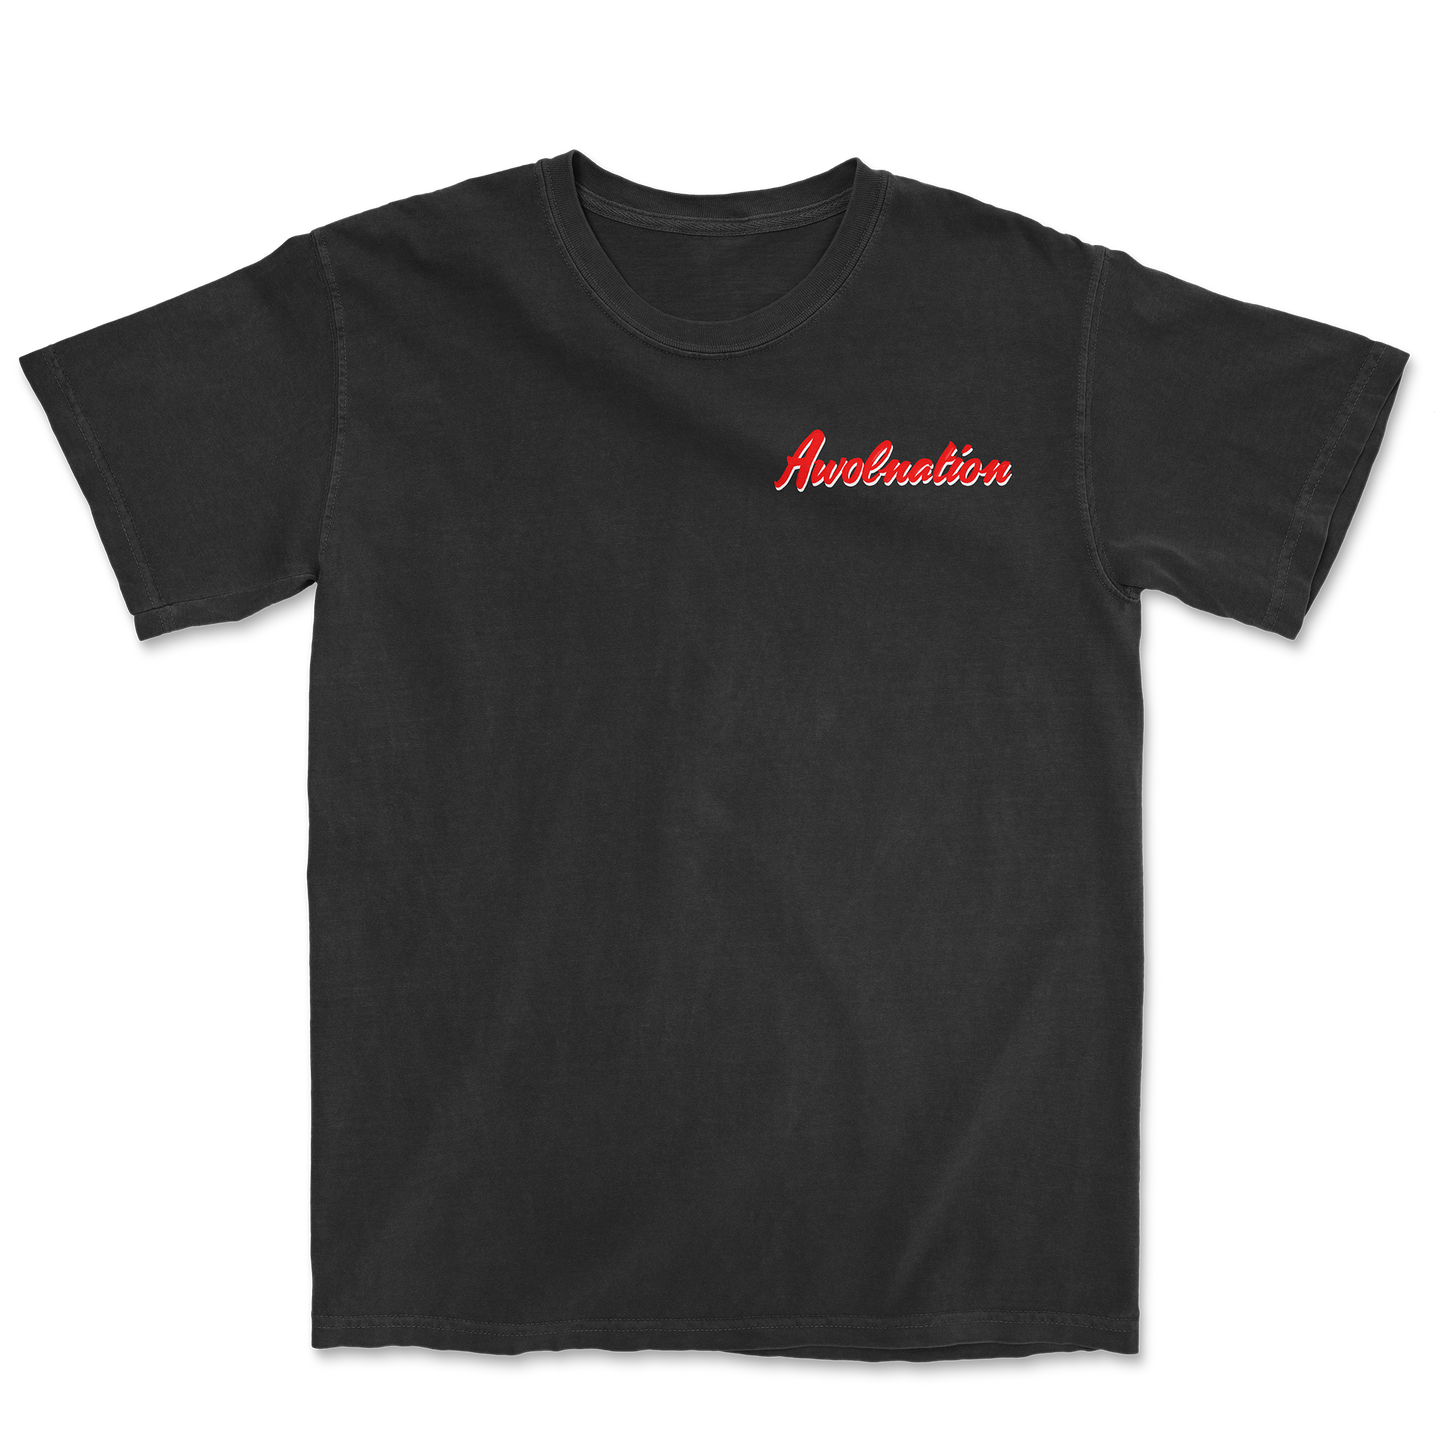 Awolnation Live Tour Tee front